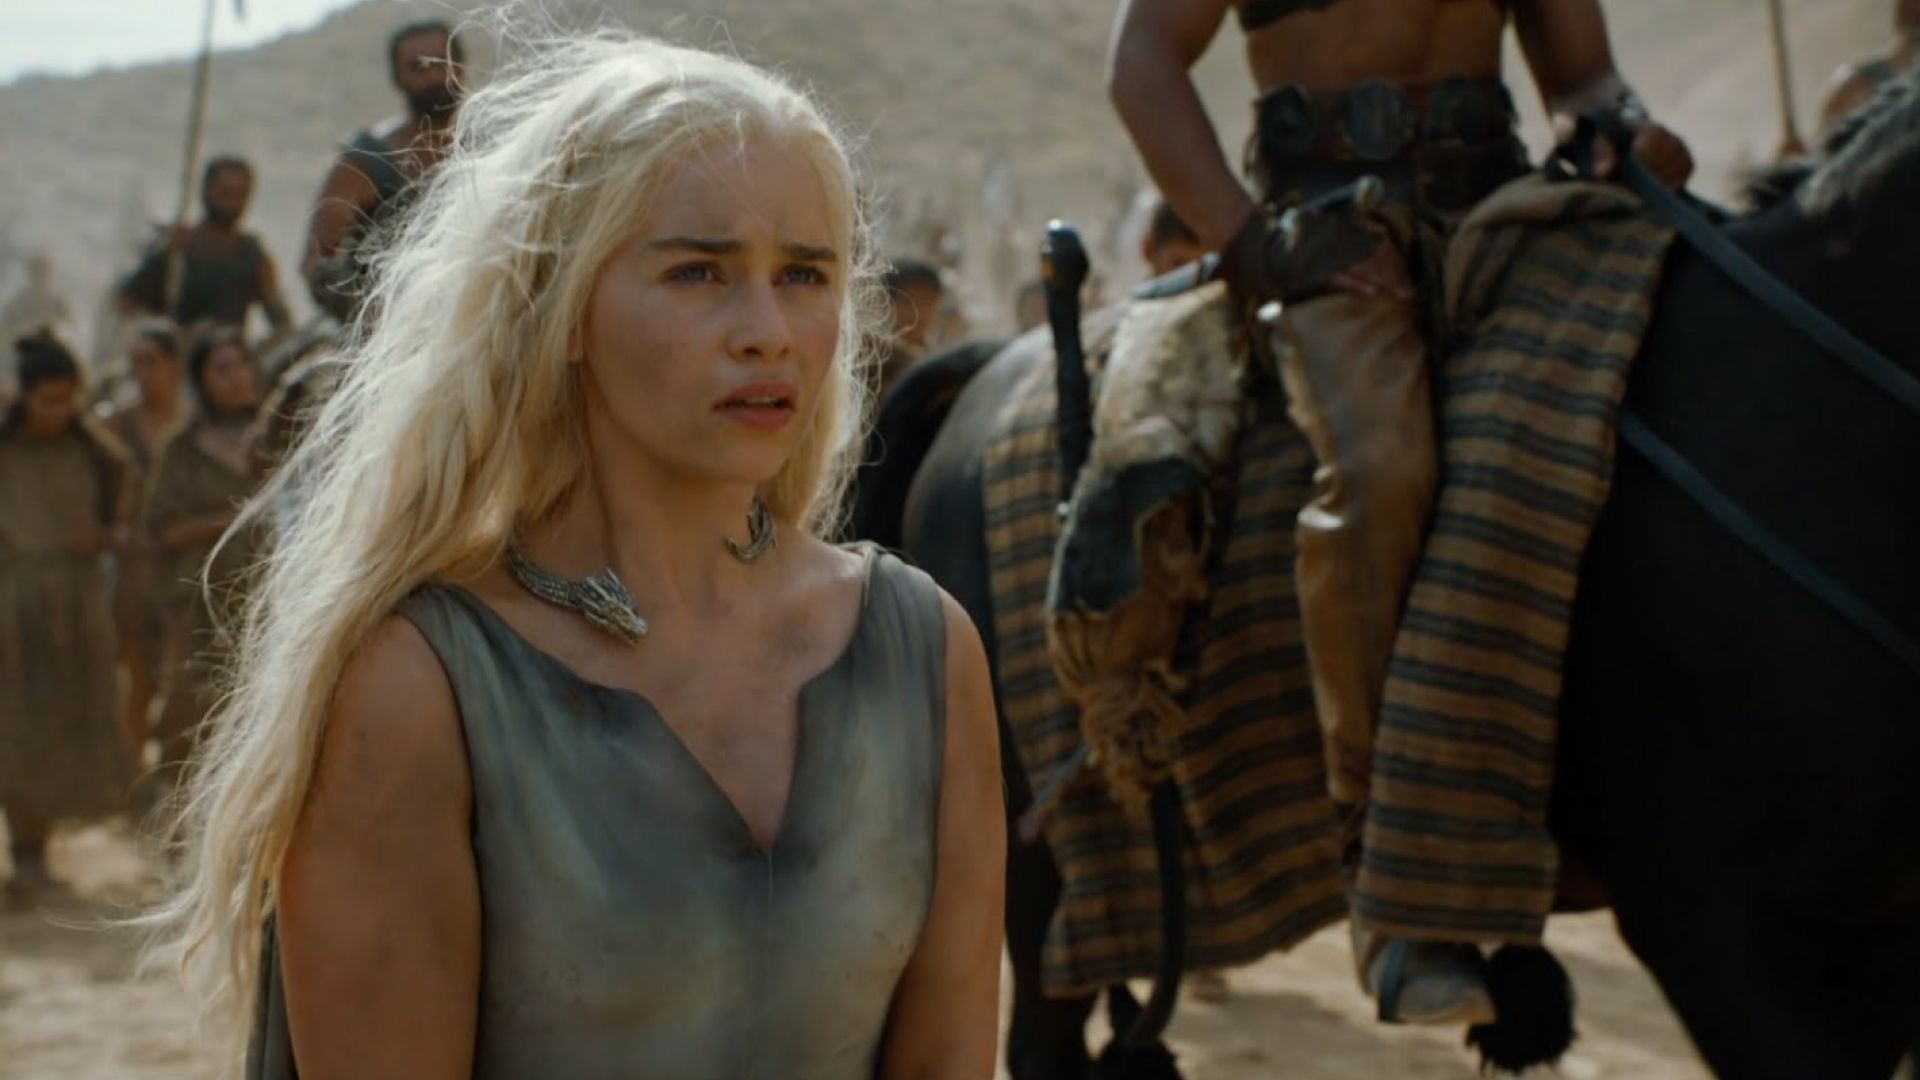 Epic Red Band Trailer Released for Game of Thrones Season 6